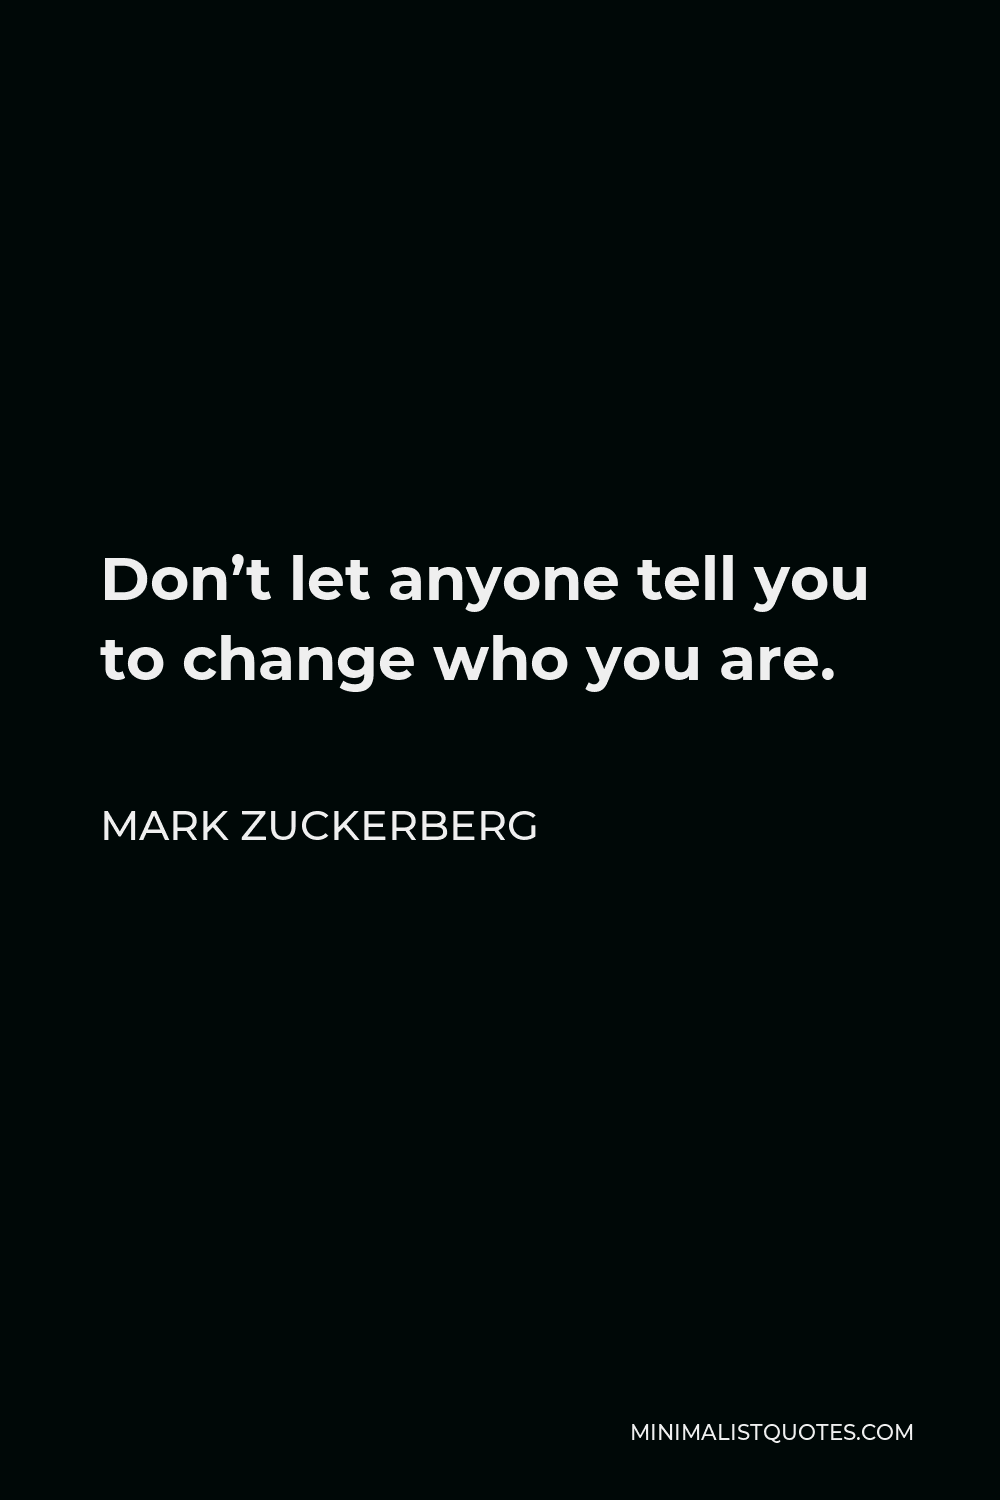 Mark Zuckerberg Quote - Don’t let anyone tell you to change who you are.